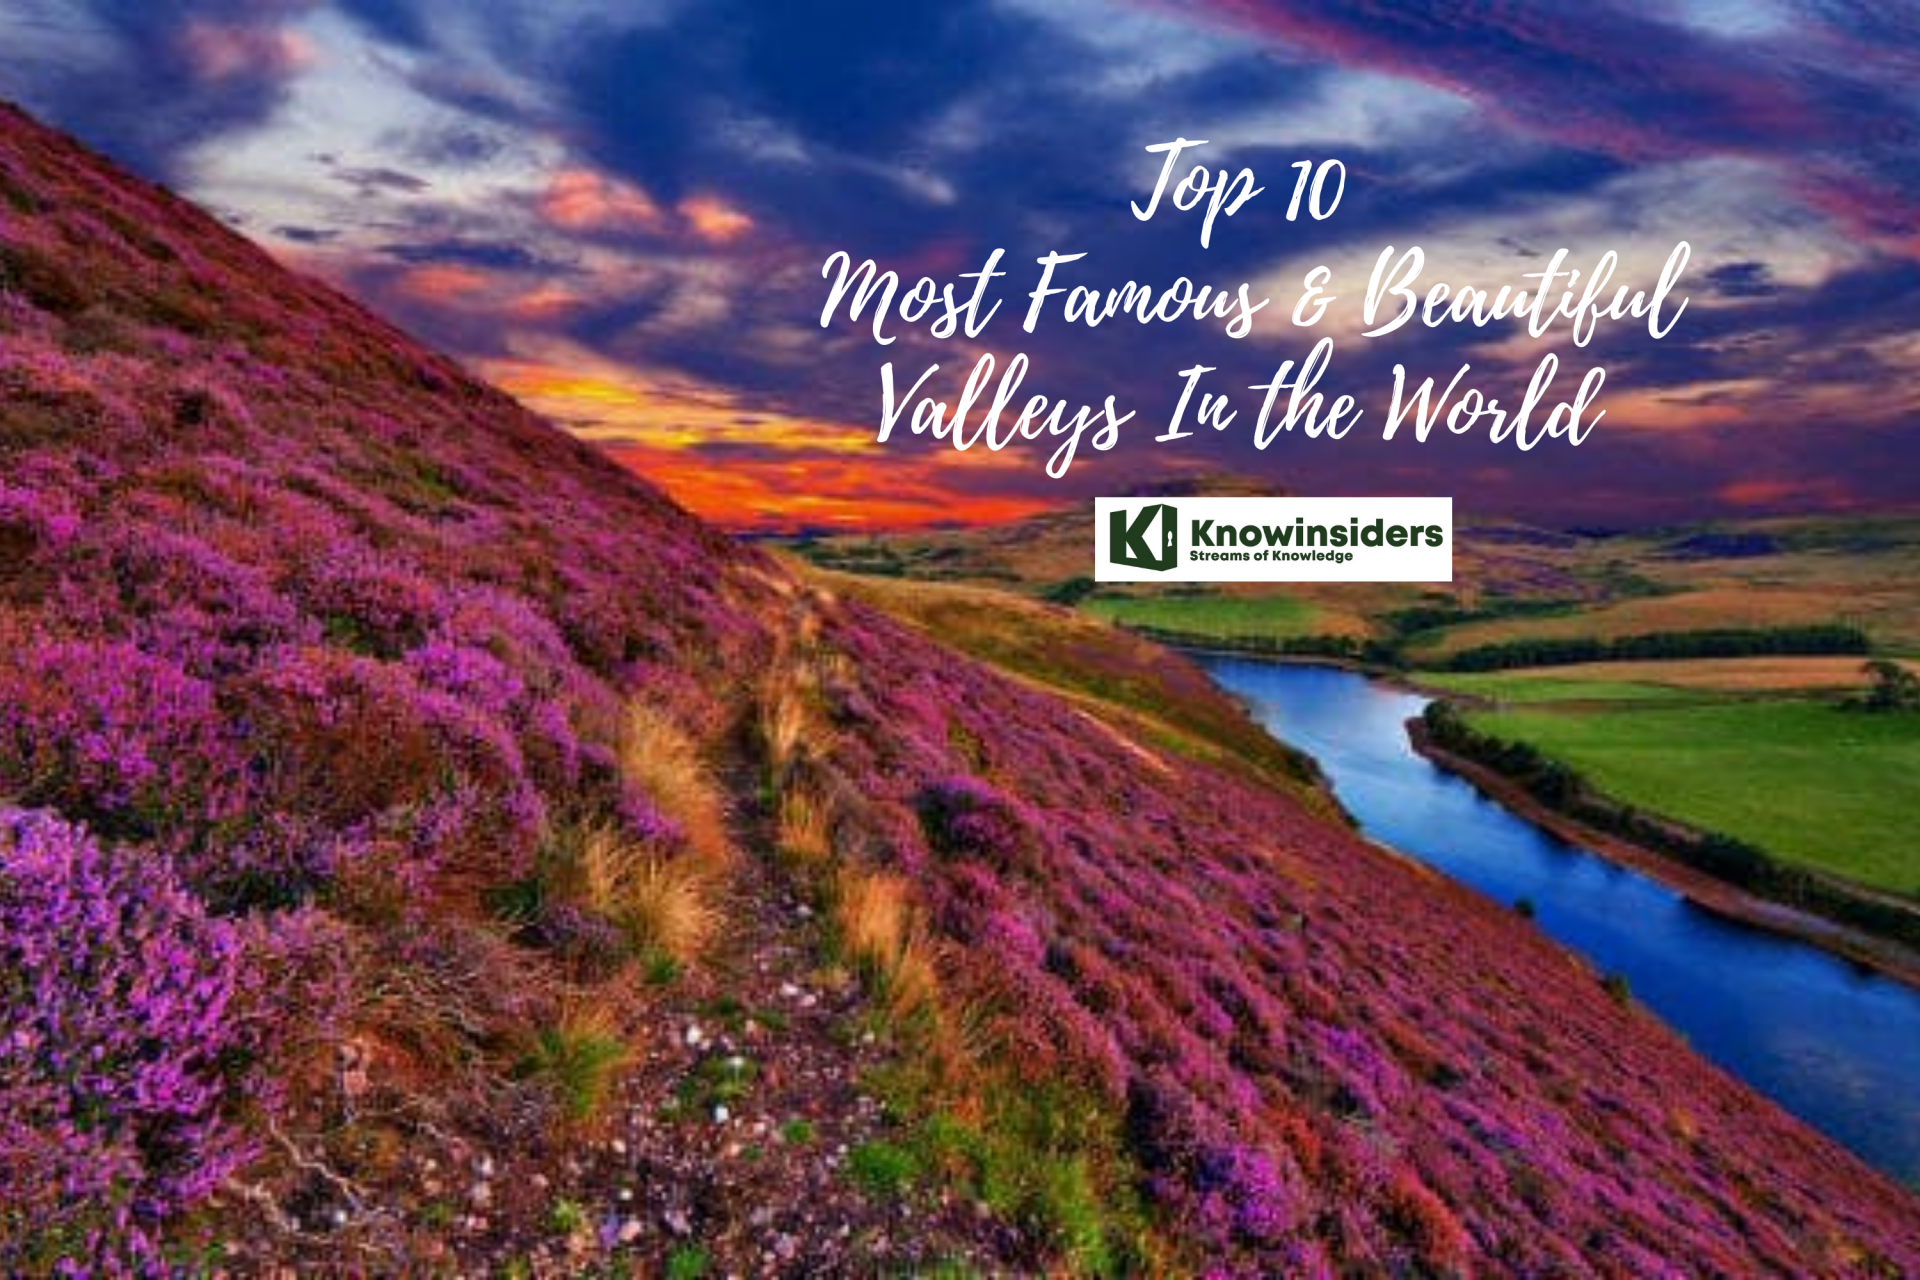 Top 10 Most Famous & Beautiful Valleys In the World